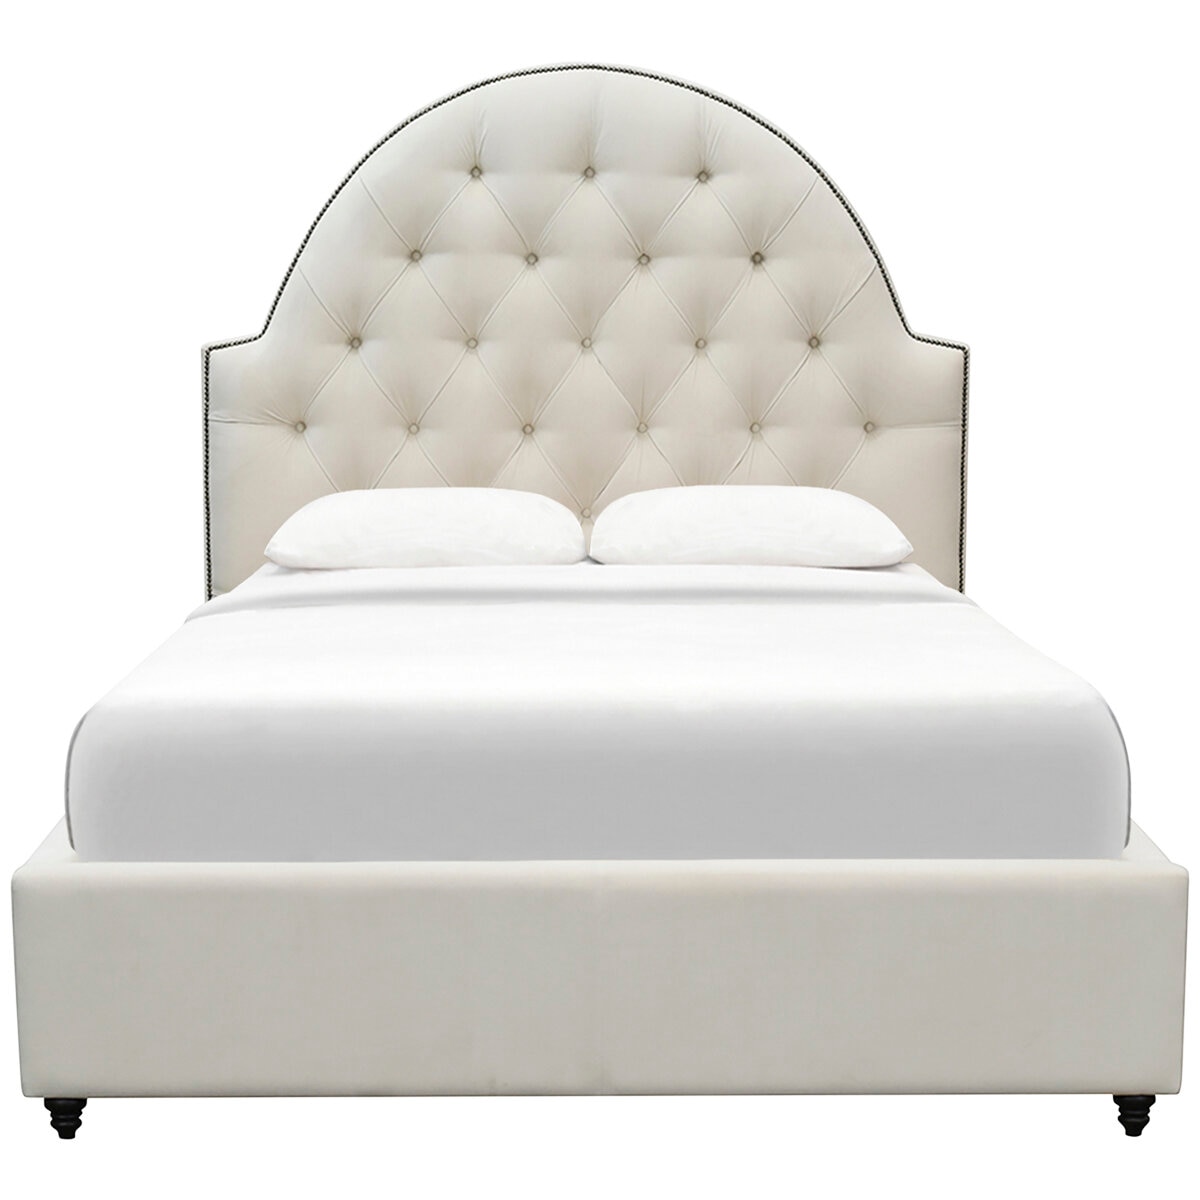 Moran Princess Double BedHead With Encasement With Slatted Base